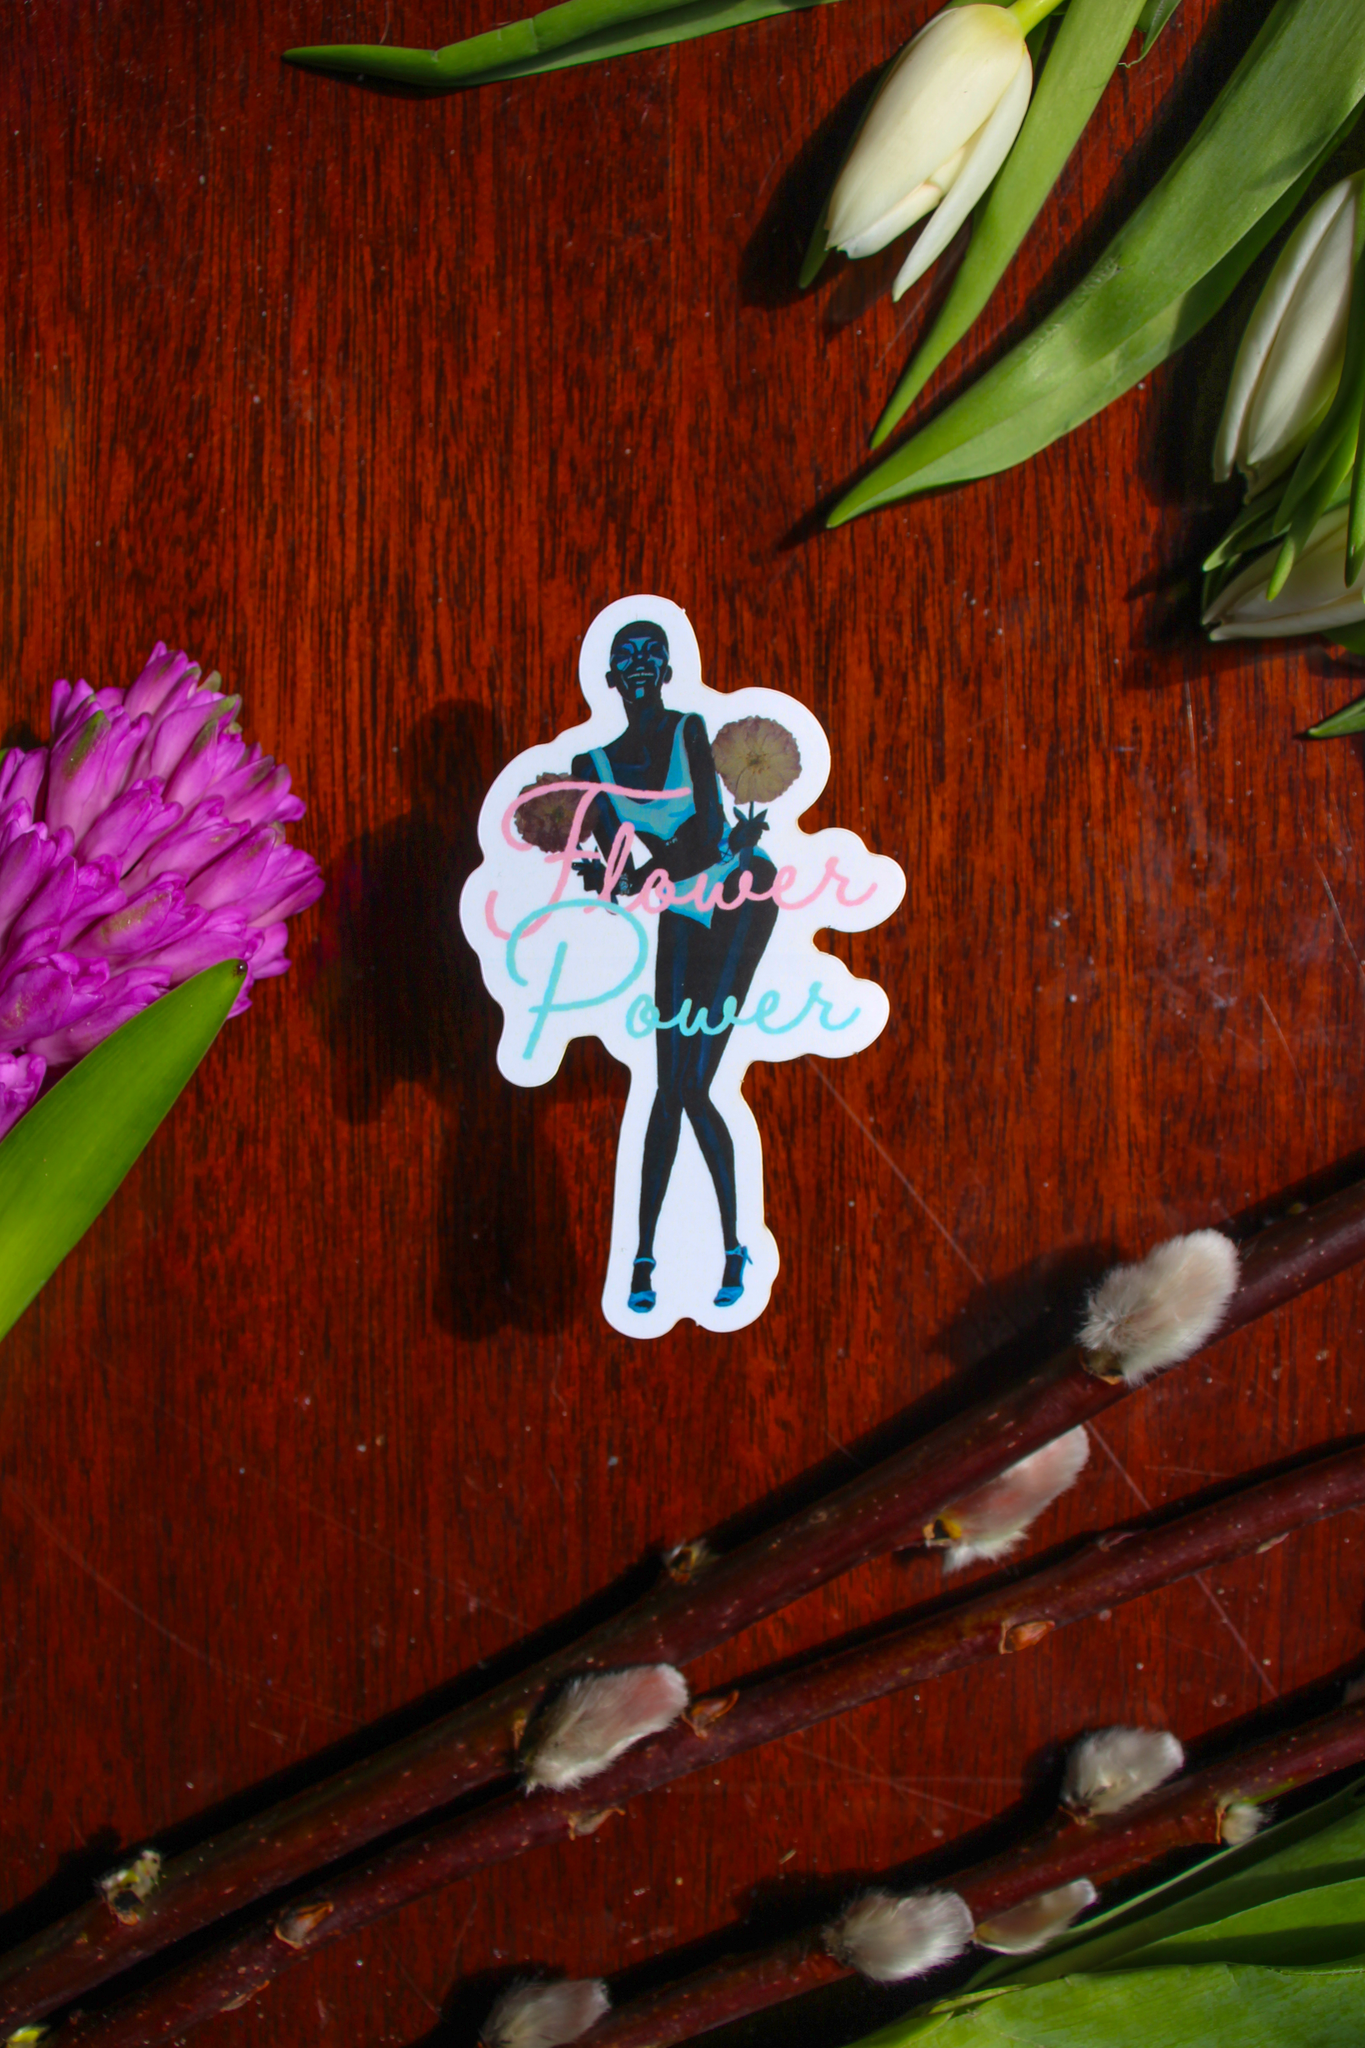 A sticker of an image of model Adut Akech wearing a Chanel one-piece and holding oversized pressed flowers, with the words "Flower Power" in front